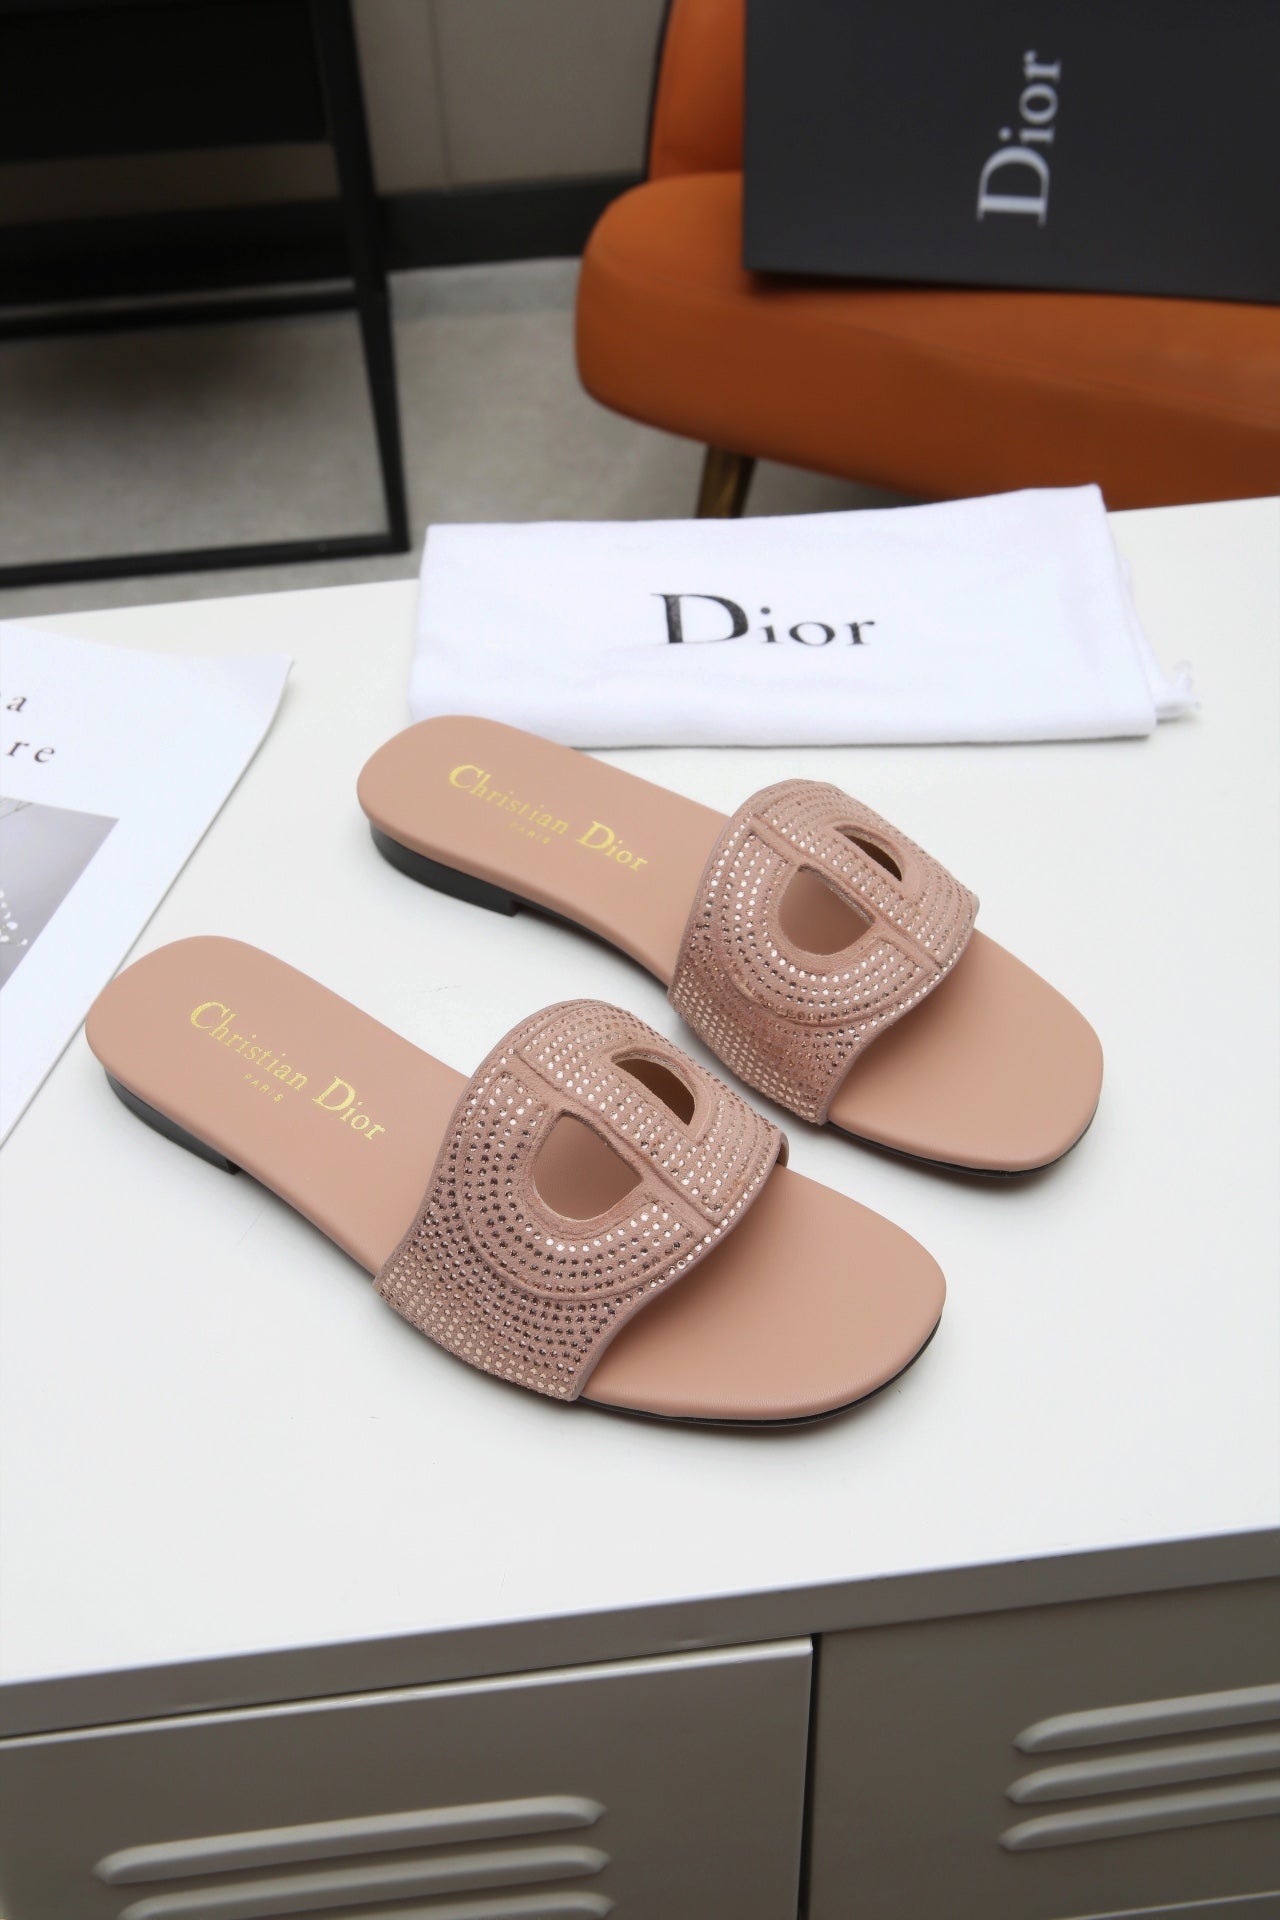 Dior Women's 2021 NEW ARRIVALS Slippers Sandals Shoes